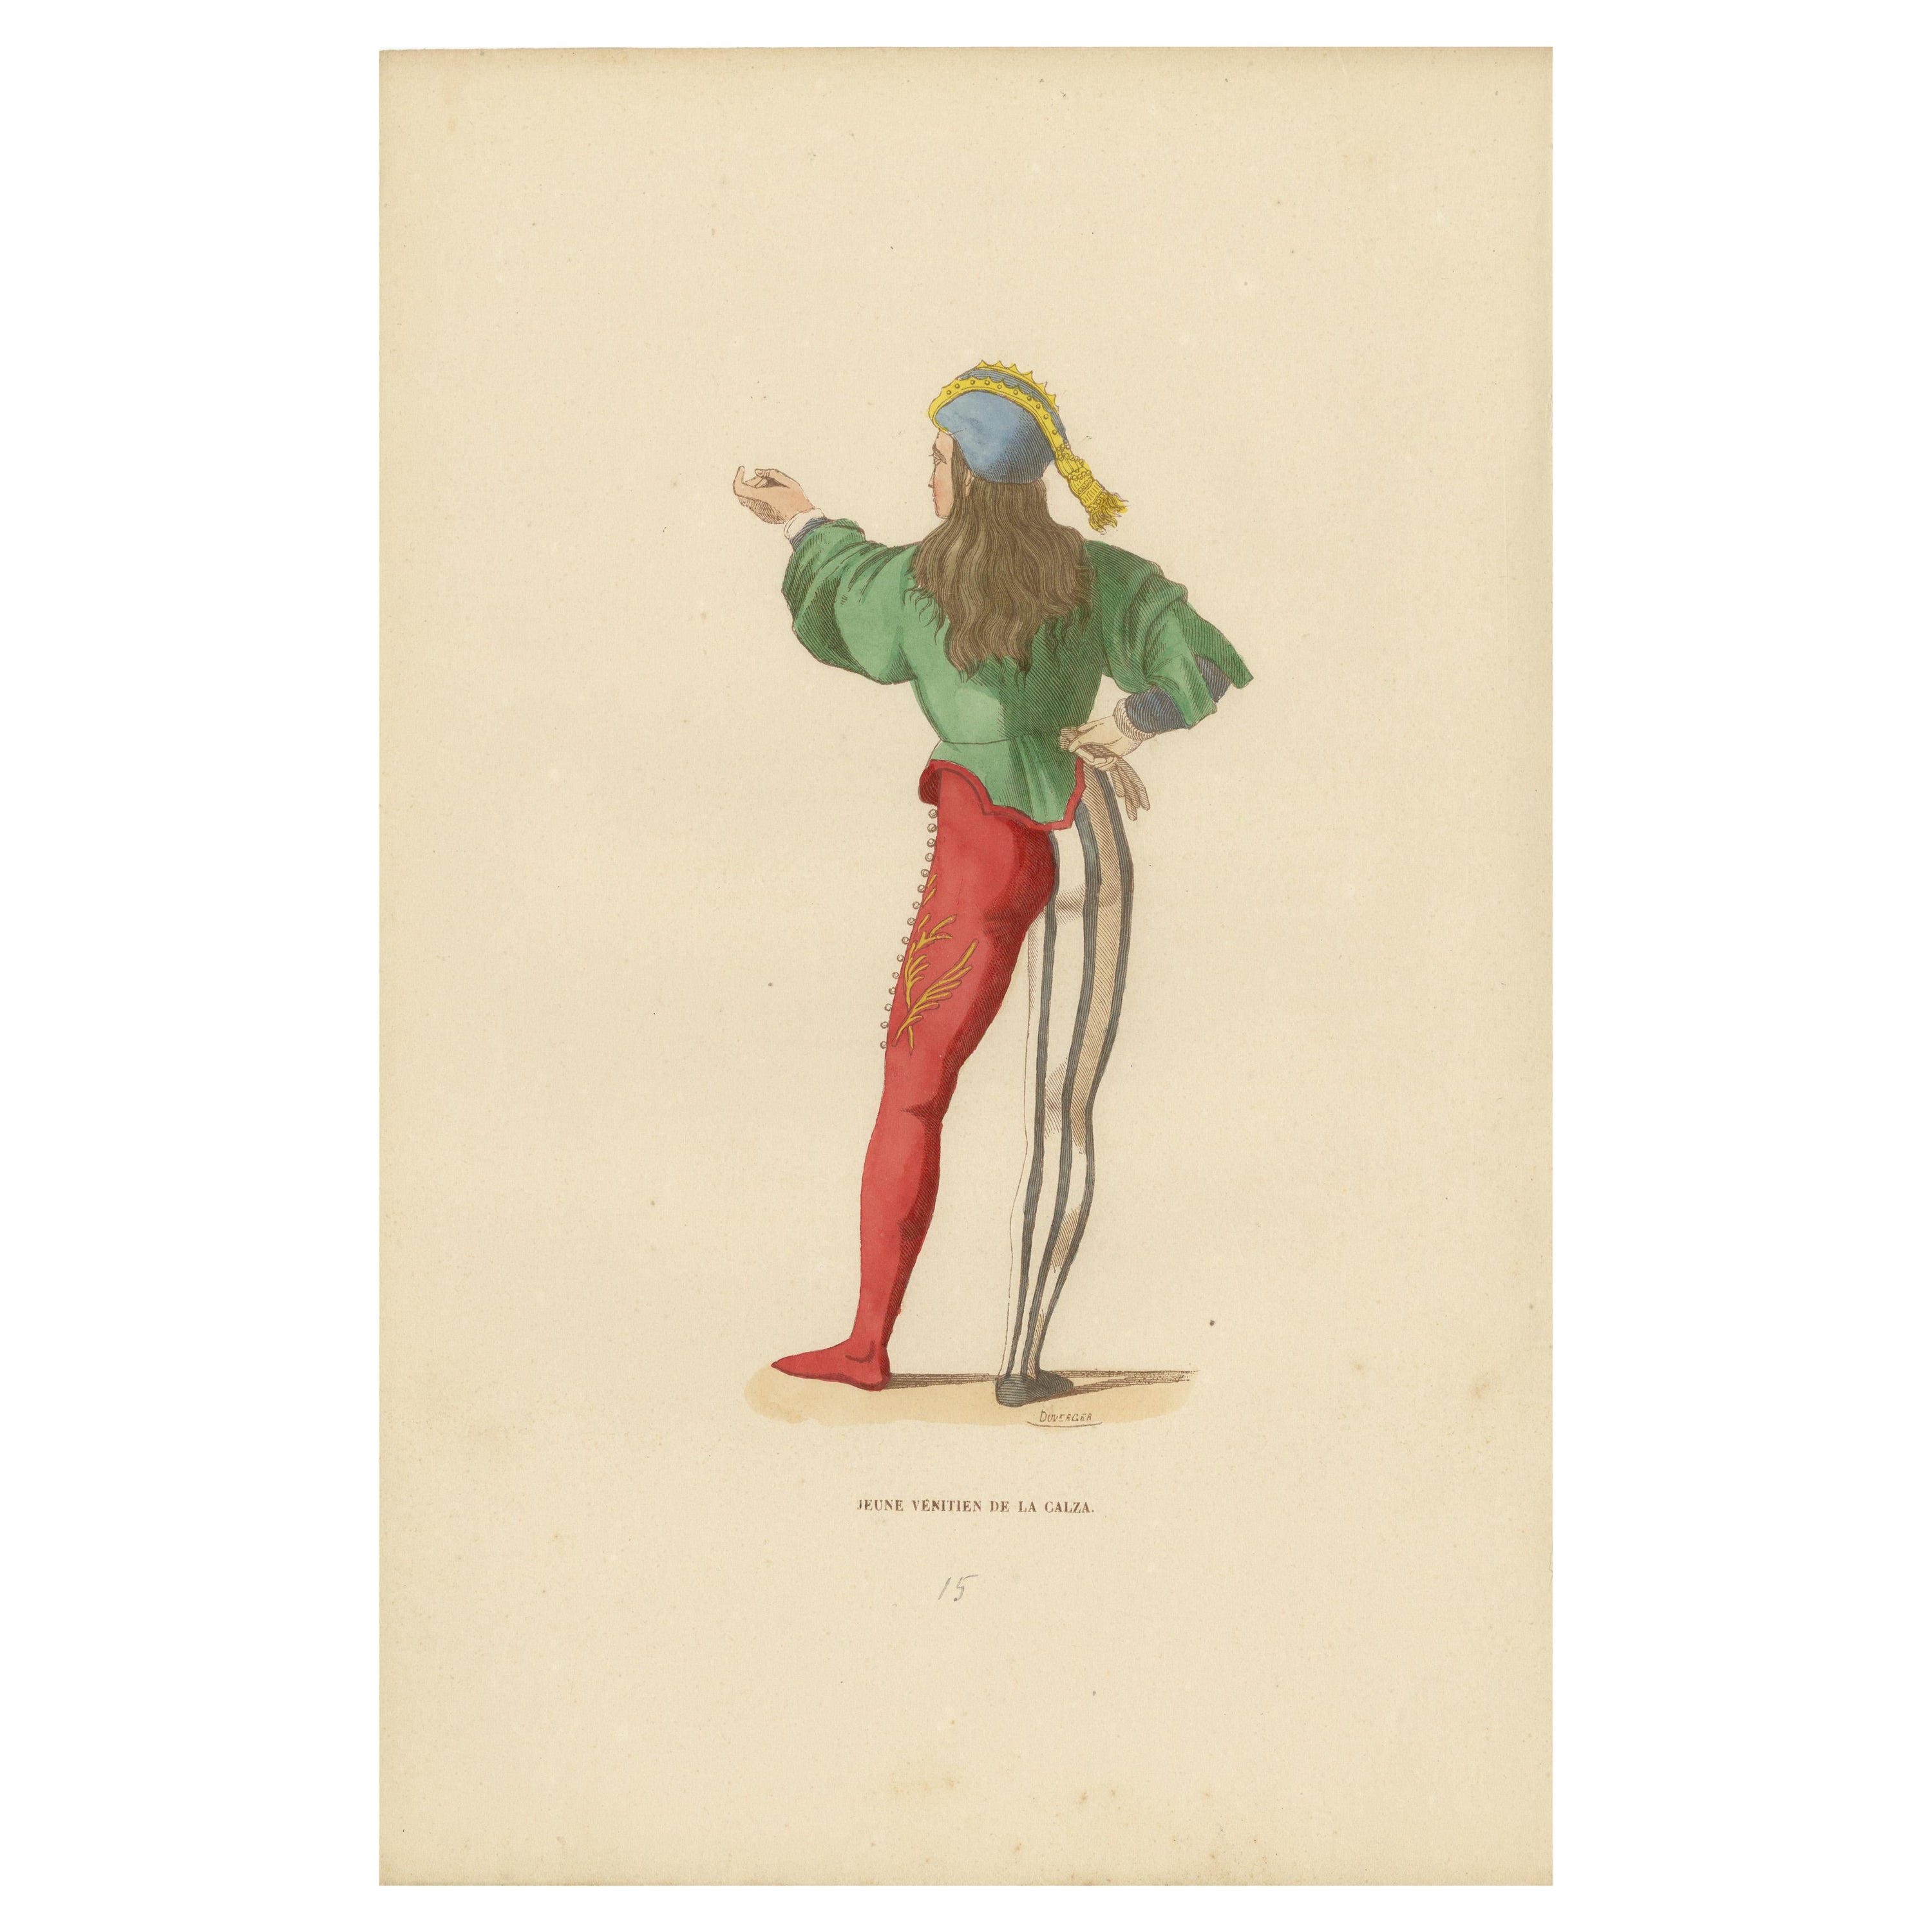 Youthful Extravagance: A Member of the Venetian Calza, 1847